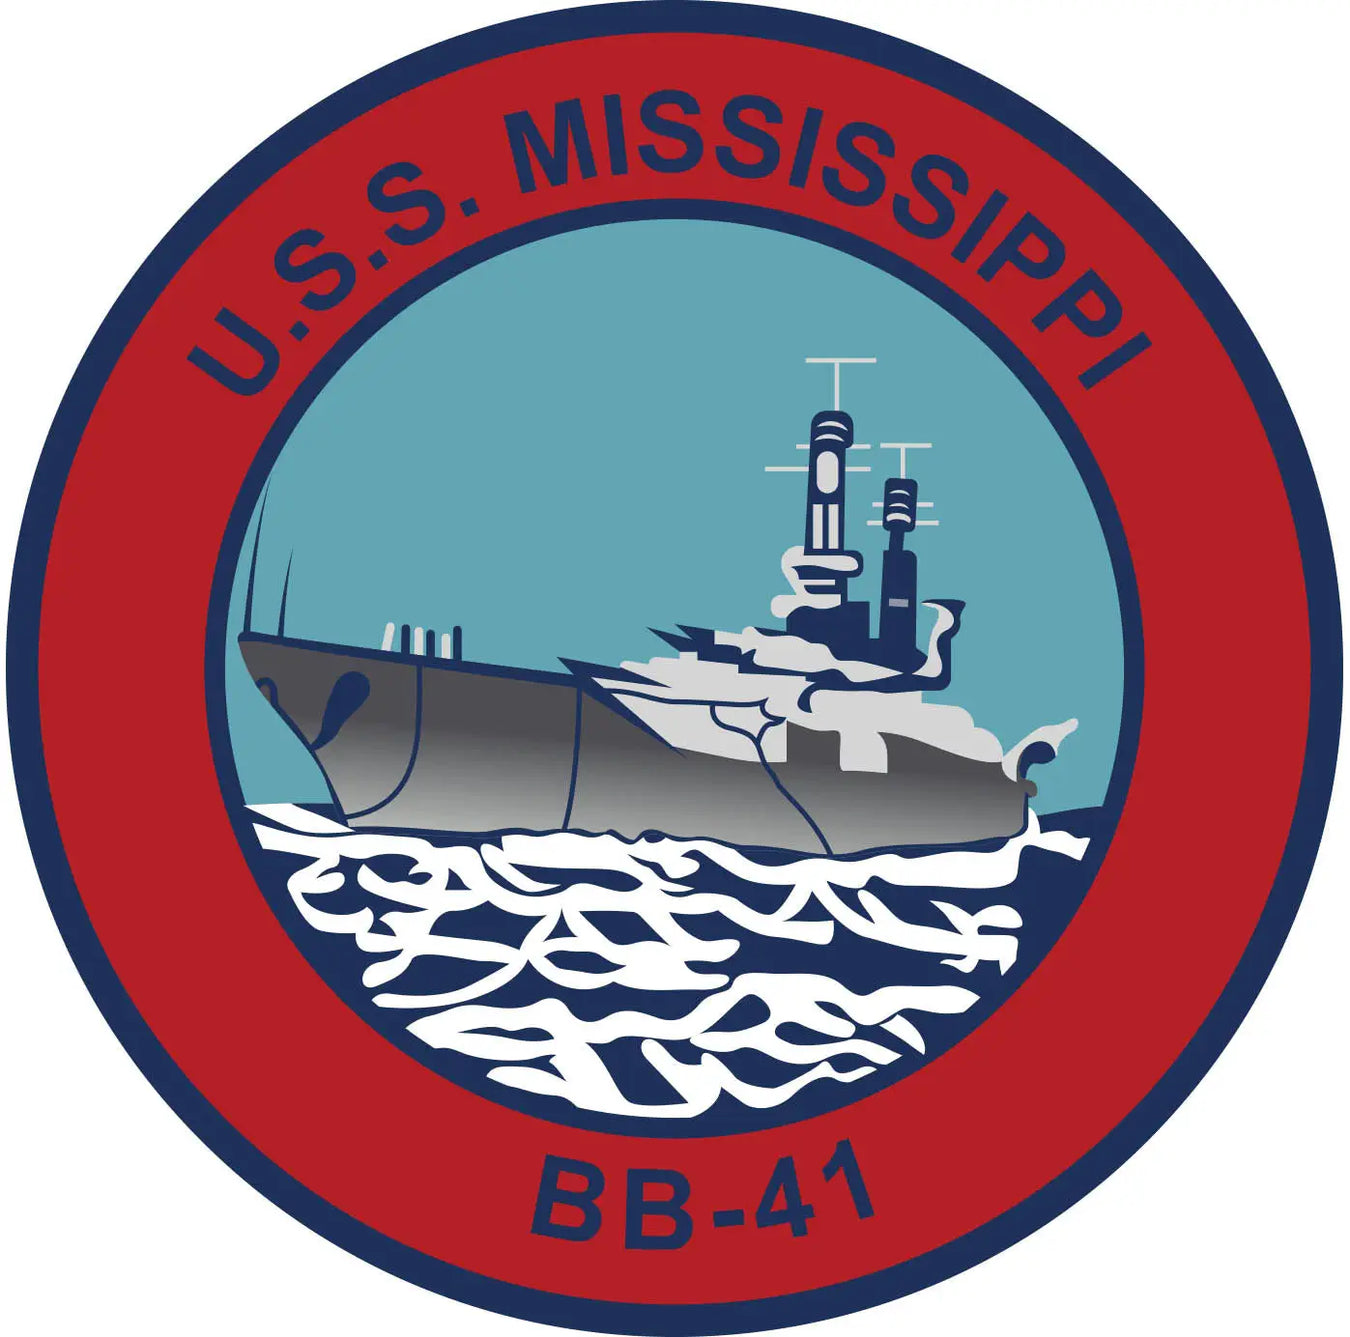 USS Mississippi (BB-41) Merchandise - Shop T-Shirts, hoodies, patches, pins, flags, decals, hats and more.